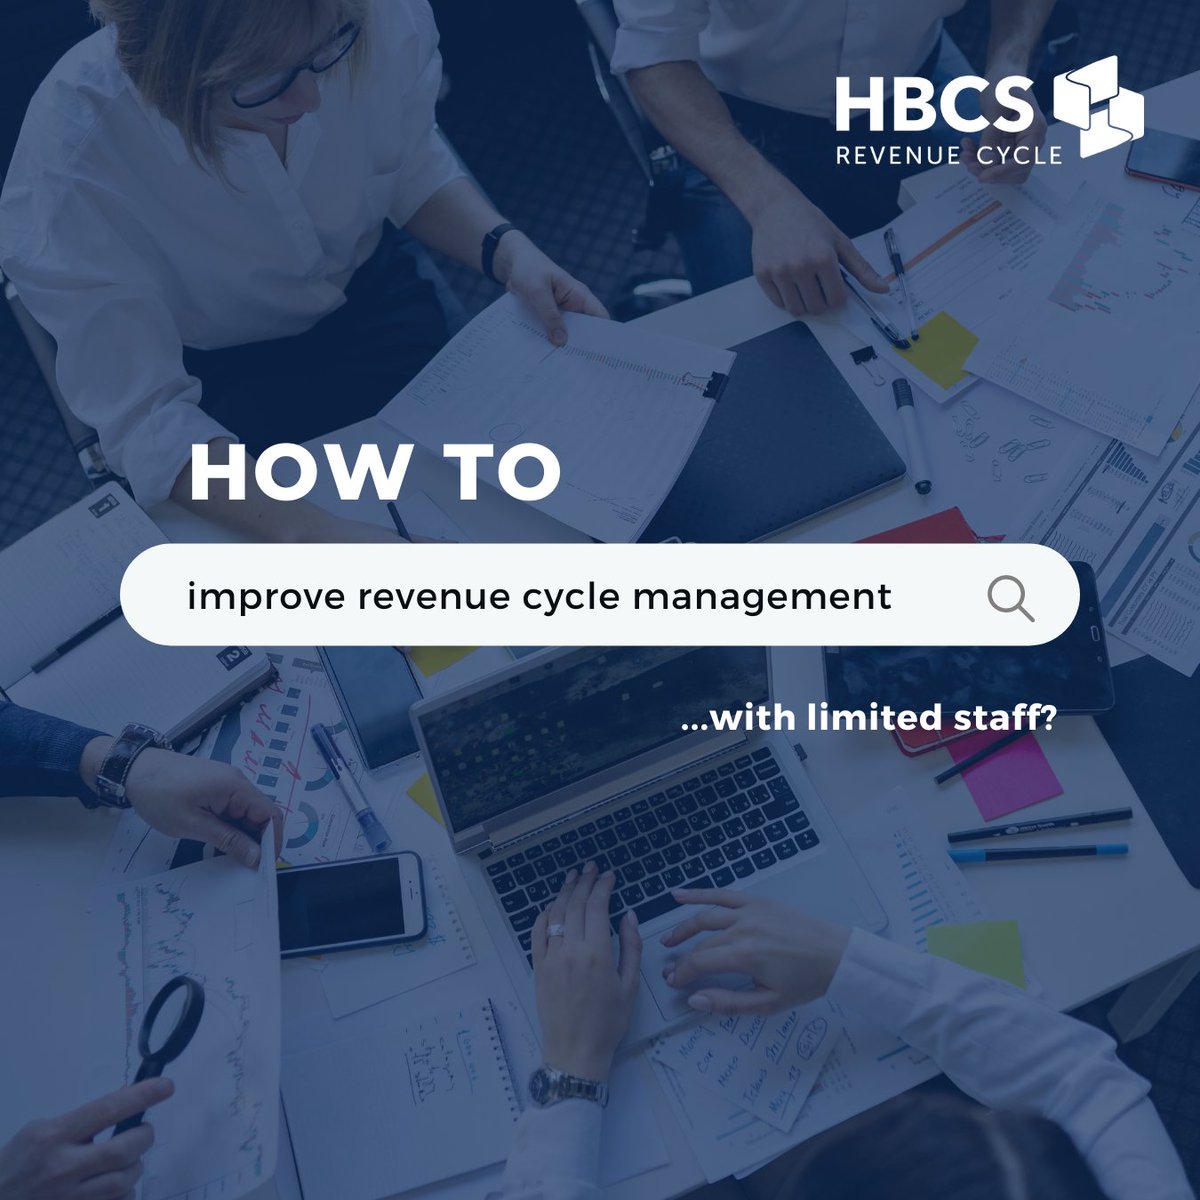 Managing your revenue cycle with limited staff can be a challenge. HBCS provides solutions to help you streamline processes and maximize revenue, even with fewer resources. #trustHBCS #RevenueCycle